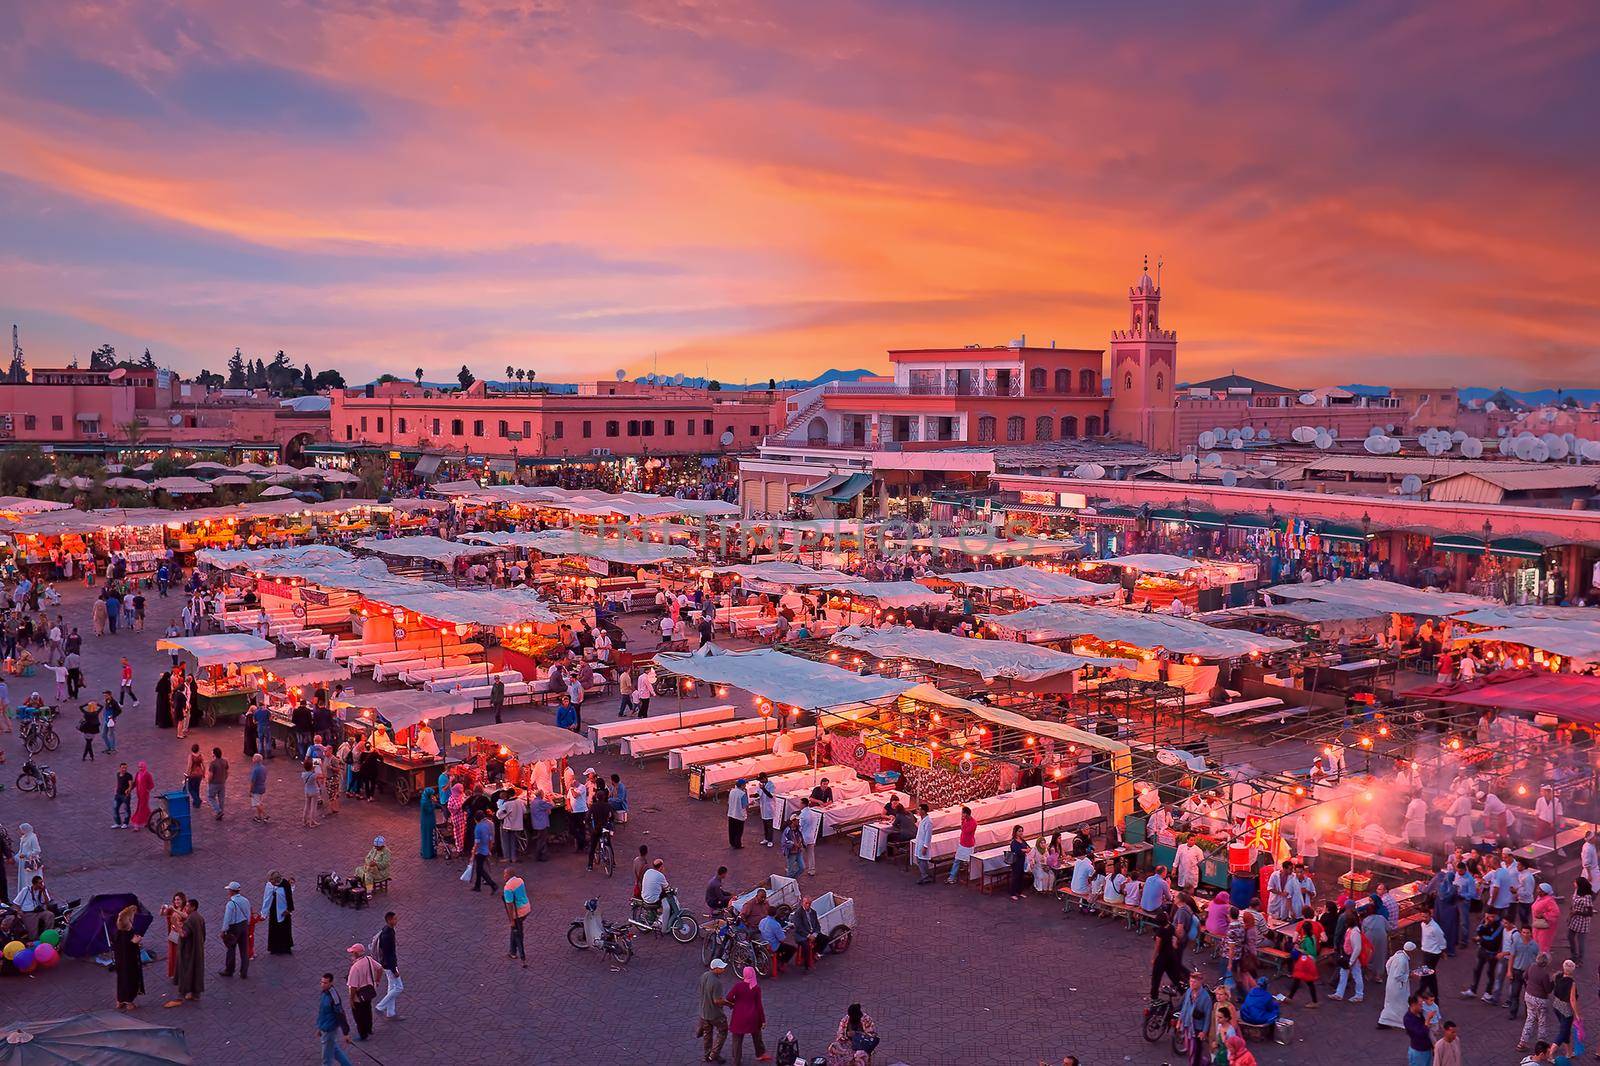 MARRAKESH, MOROCCO - October 22, 2013: Evening on Djemaa El Fna Square with Koutoubia Mosque, Marrakech, Morocco by devy